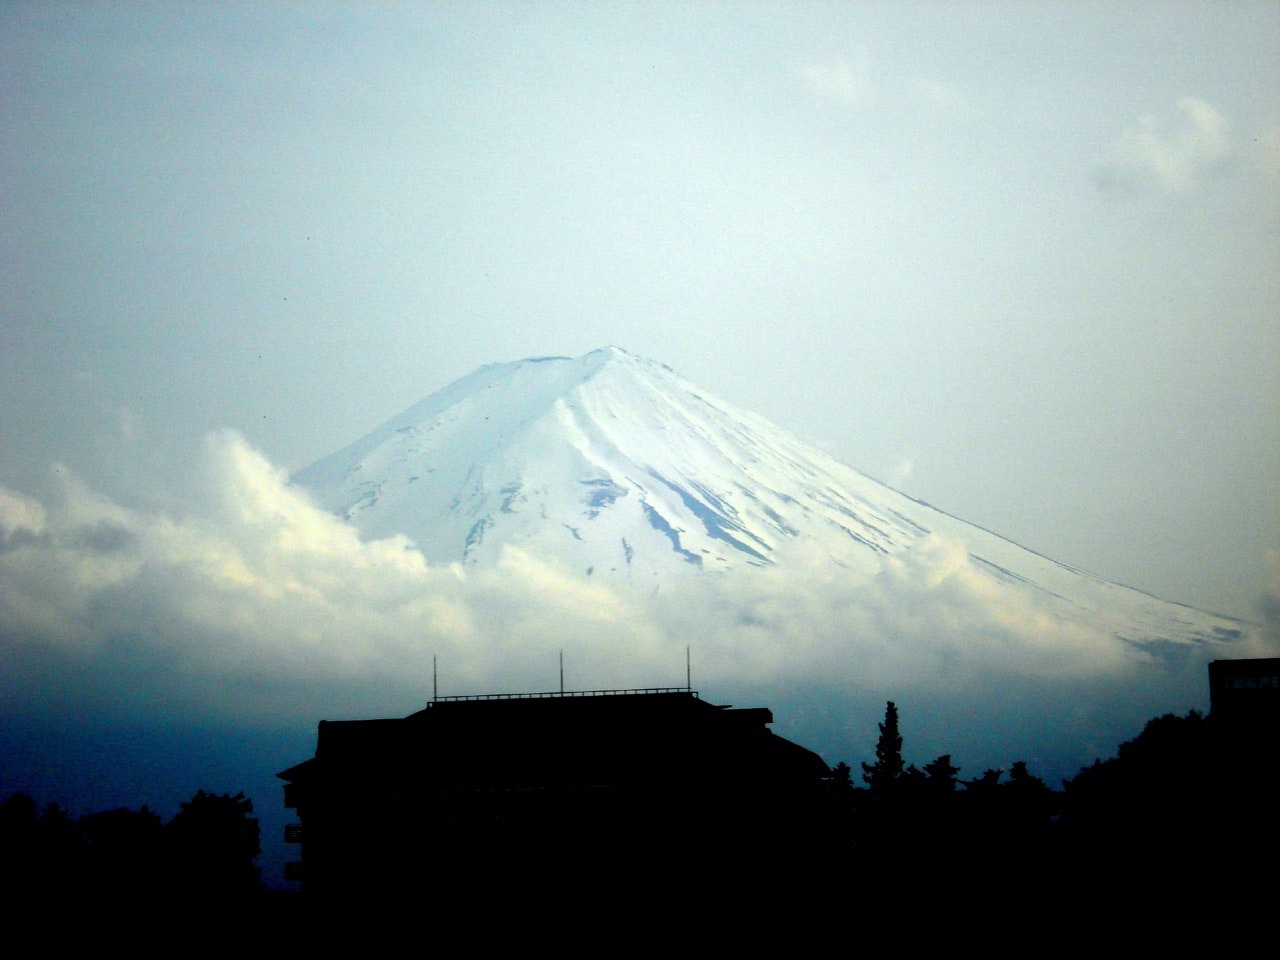 Clouds around the base of Mt Fuji, in Japan, with a building silhouetted in the foreground